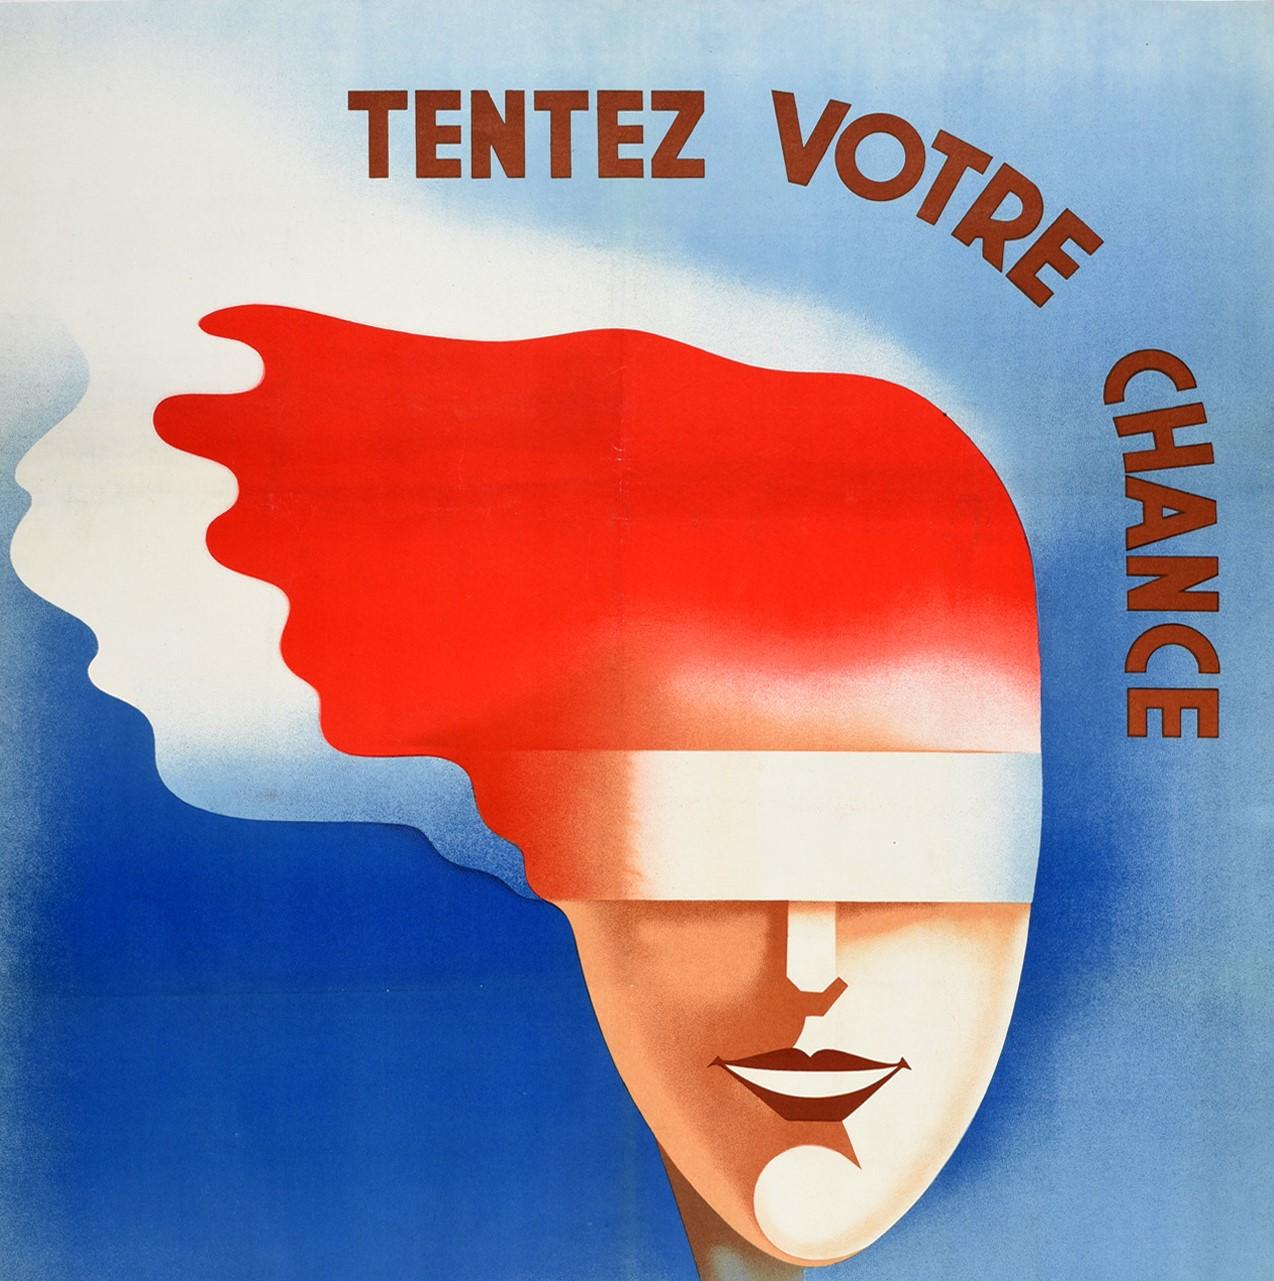 Original vintage advertising poster for the French National Lottery - Try Your Luck / Tentez Votre Chance Loterie Nationale - featuring a great Art Deco illustration of a smiling blindfolded lady with her red and white hair flowing against the blue